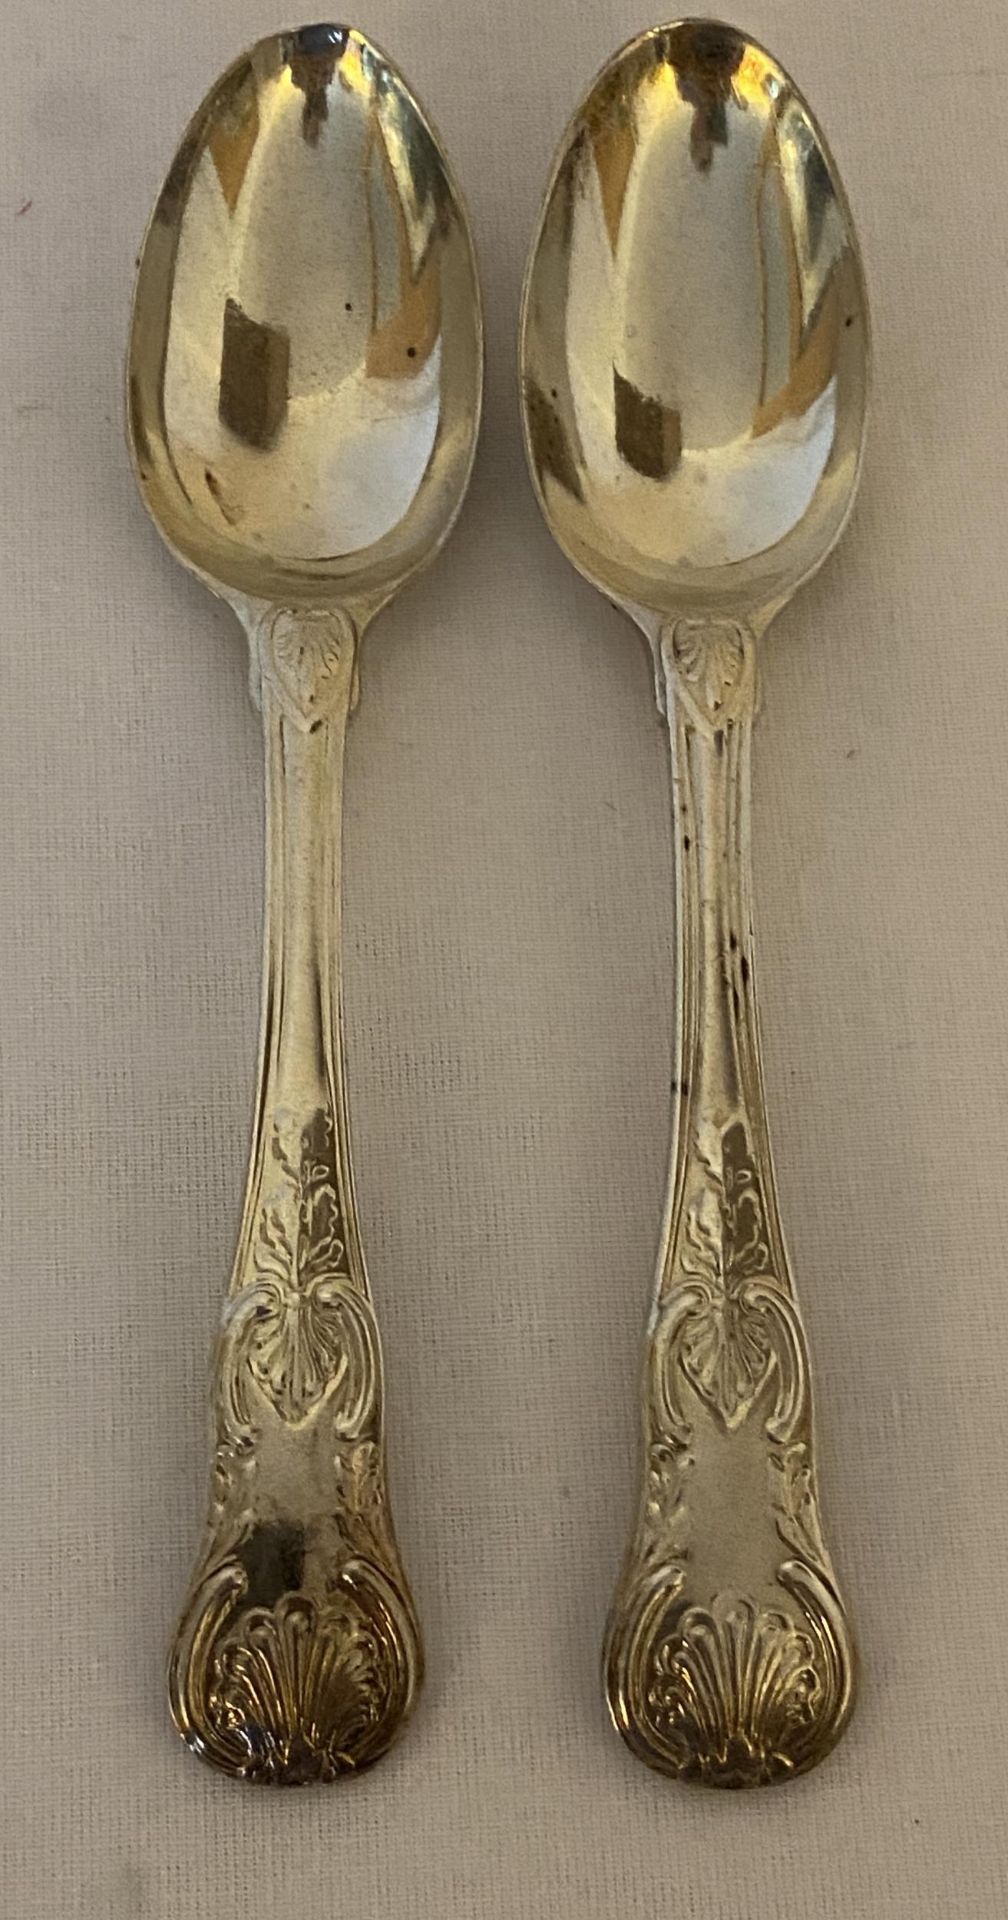 A PAIR OF WILLIAM IV 1832 HALLMARKED LONDON SILVER TEASPOONS, MAKER W.F, POSSIBLY WILLIAM - Image 2 of 18